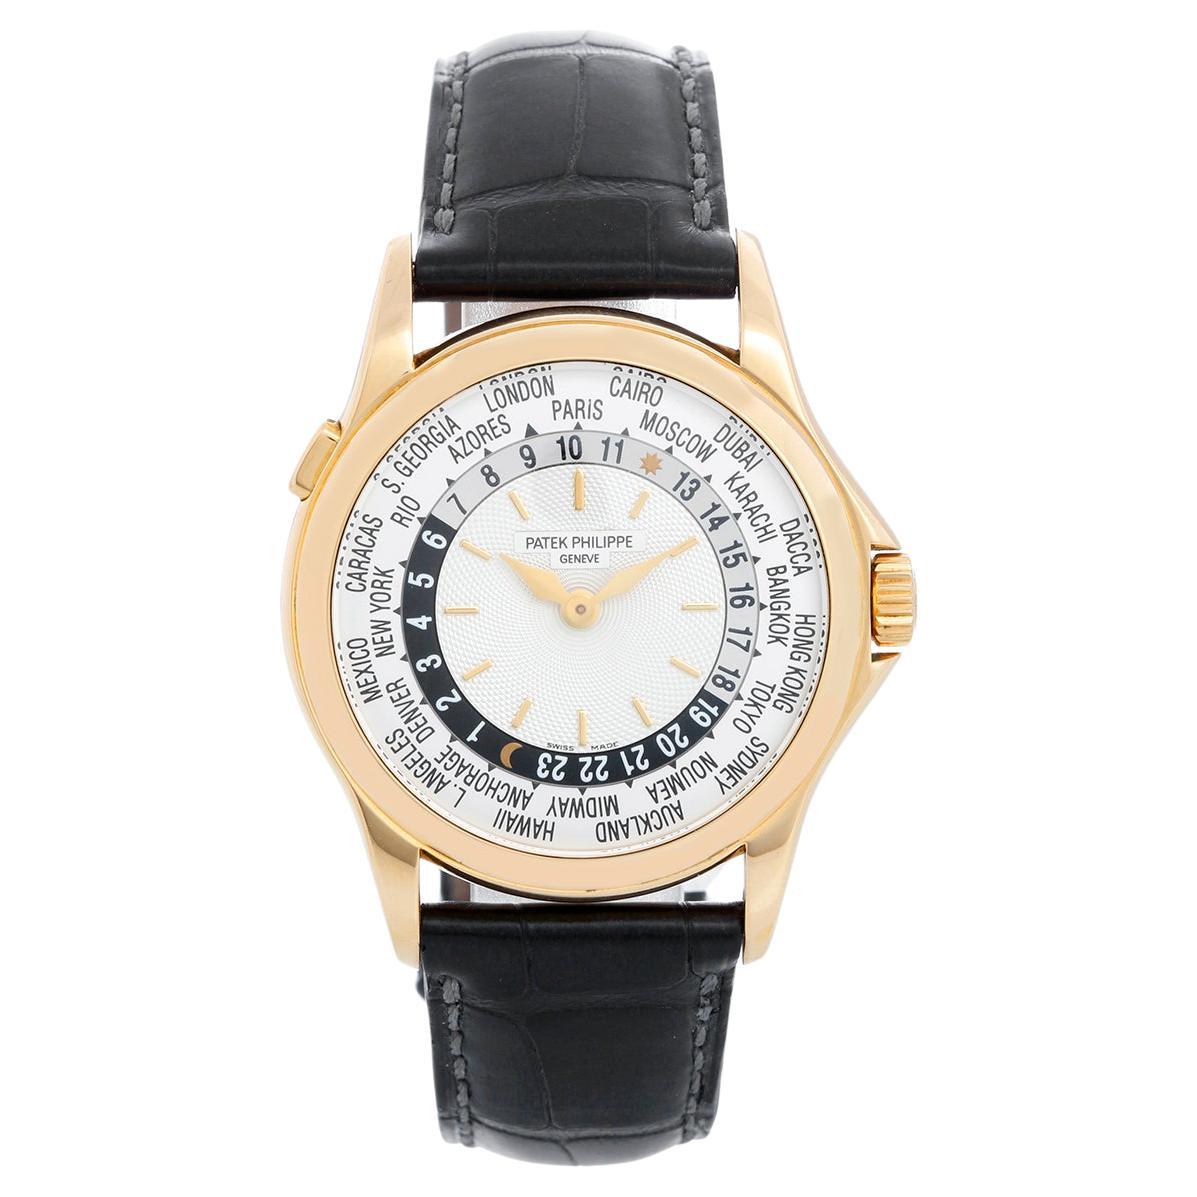 What is the best Patek Philippe watch?